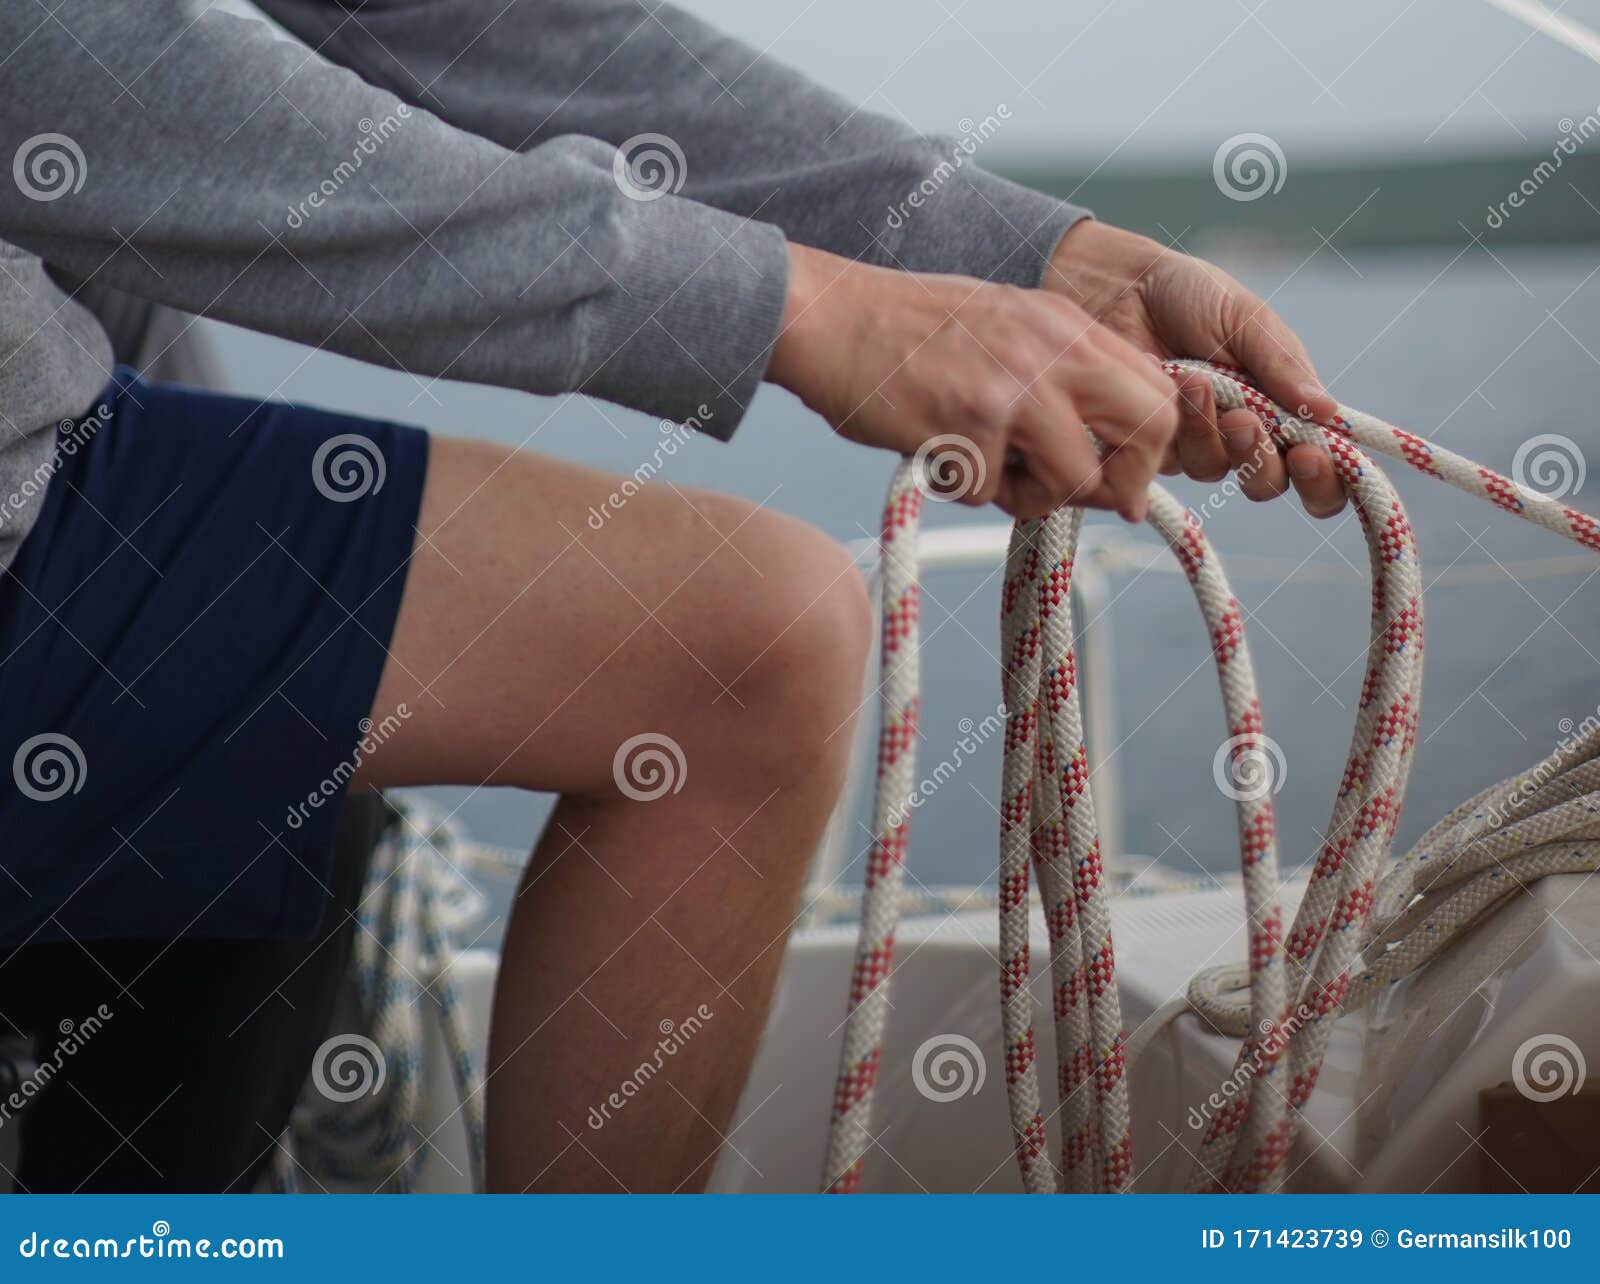 close up of hands coiling up a rope, the halyard